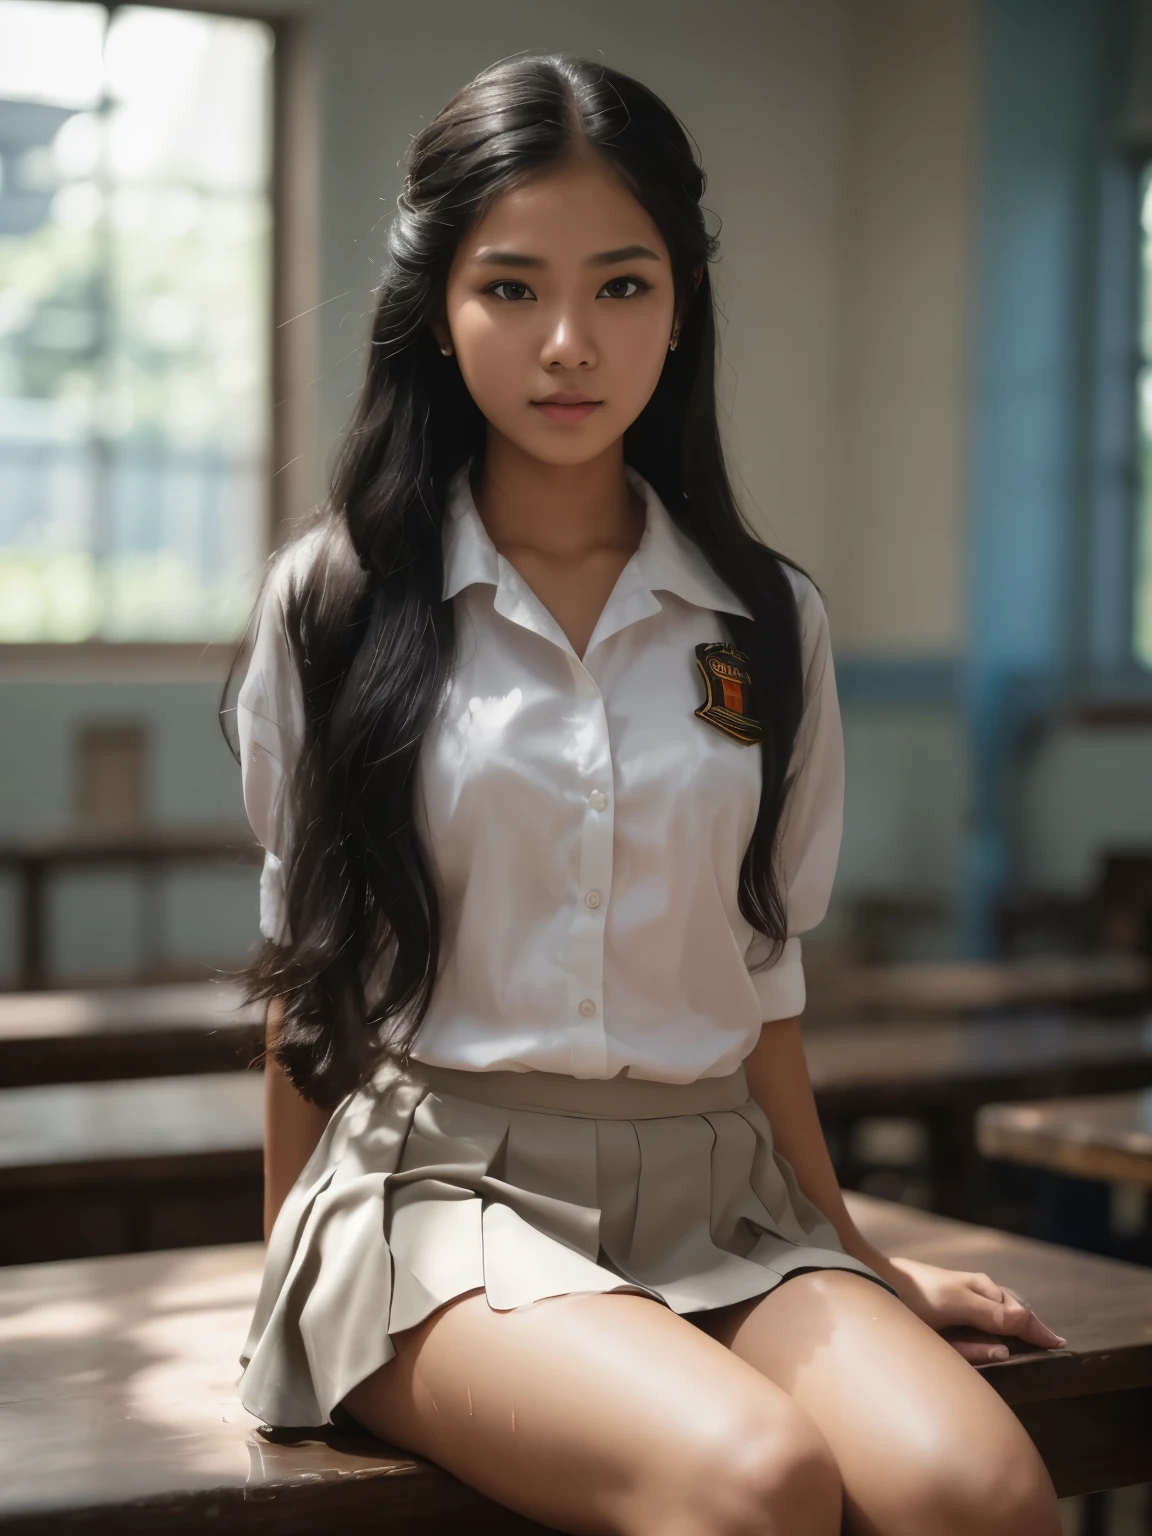 At bright day at indonesian high school, hyper ultra realistic photography, dramatic light, natural full body of beautiful Indonesian Javanese girl, 16 years old, moist shiny full sweat skin, long black hair braid hairstyle, raise her hands, wearing indonesian high school tight & wet high uniform, all button are opened, showing cleavage of her big breast & teaseing her red lace brassire, wear blue grey skirt, environtment on dramatic light tungsten, ultra realistic photo, HDR10 8K top angle camera, good anatomy, good proportion of body hand & fingers --style raw --v 6.0